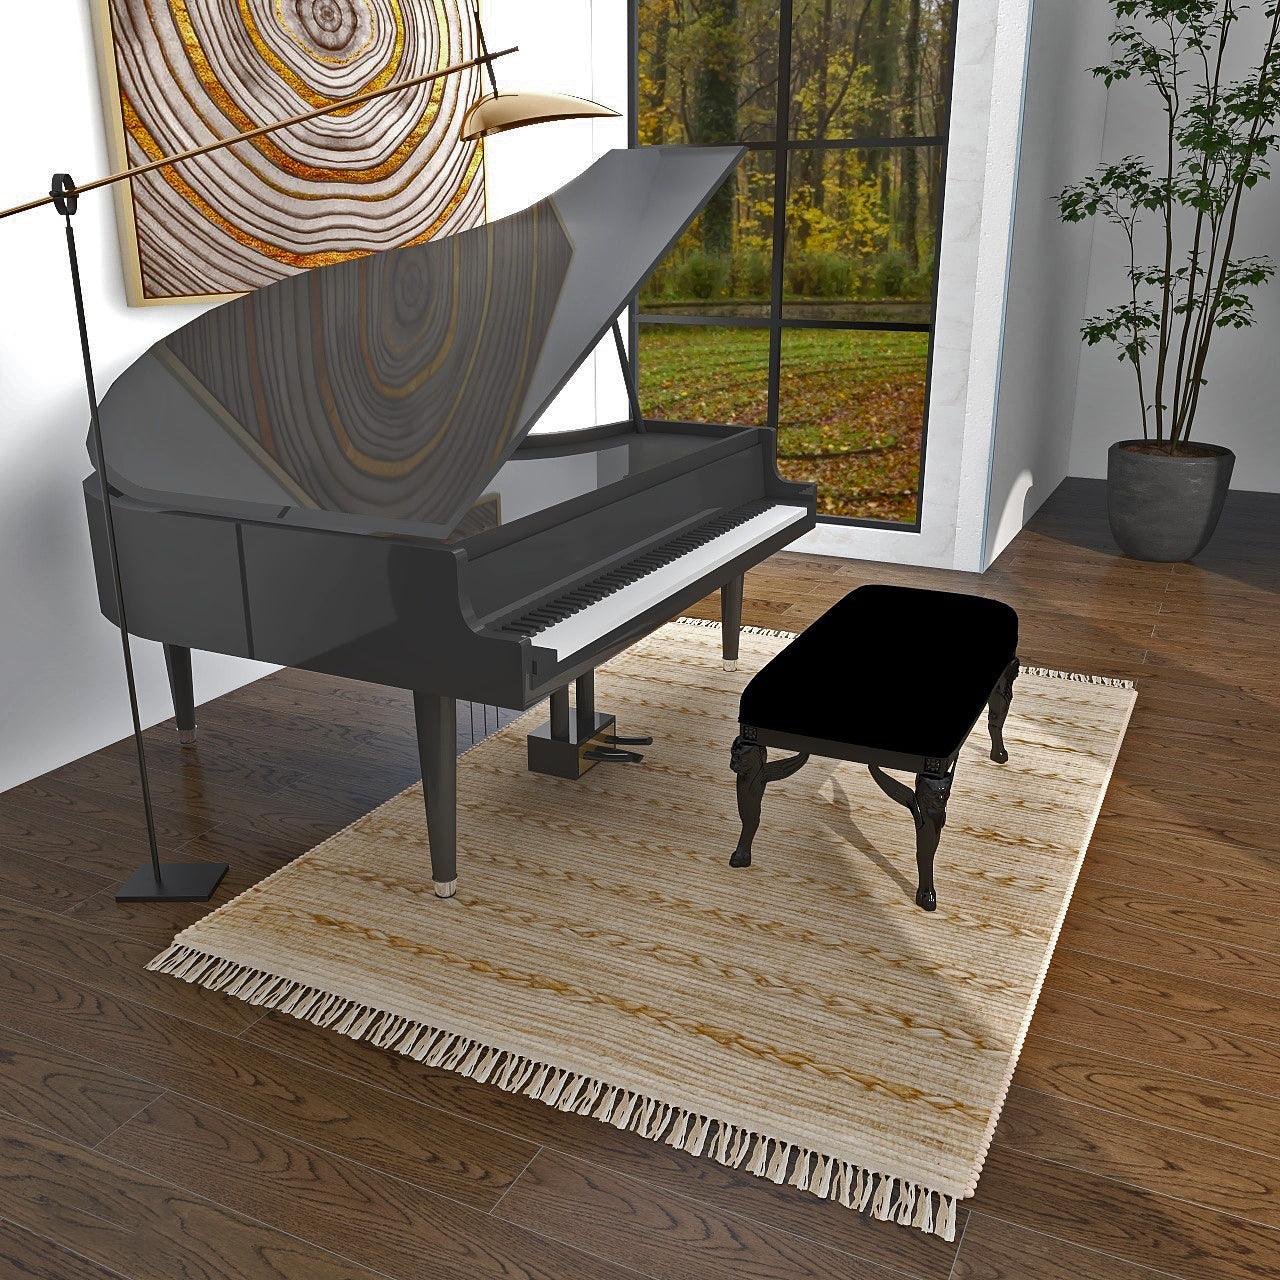 Area rug under a piano table